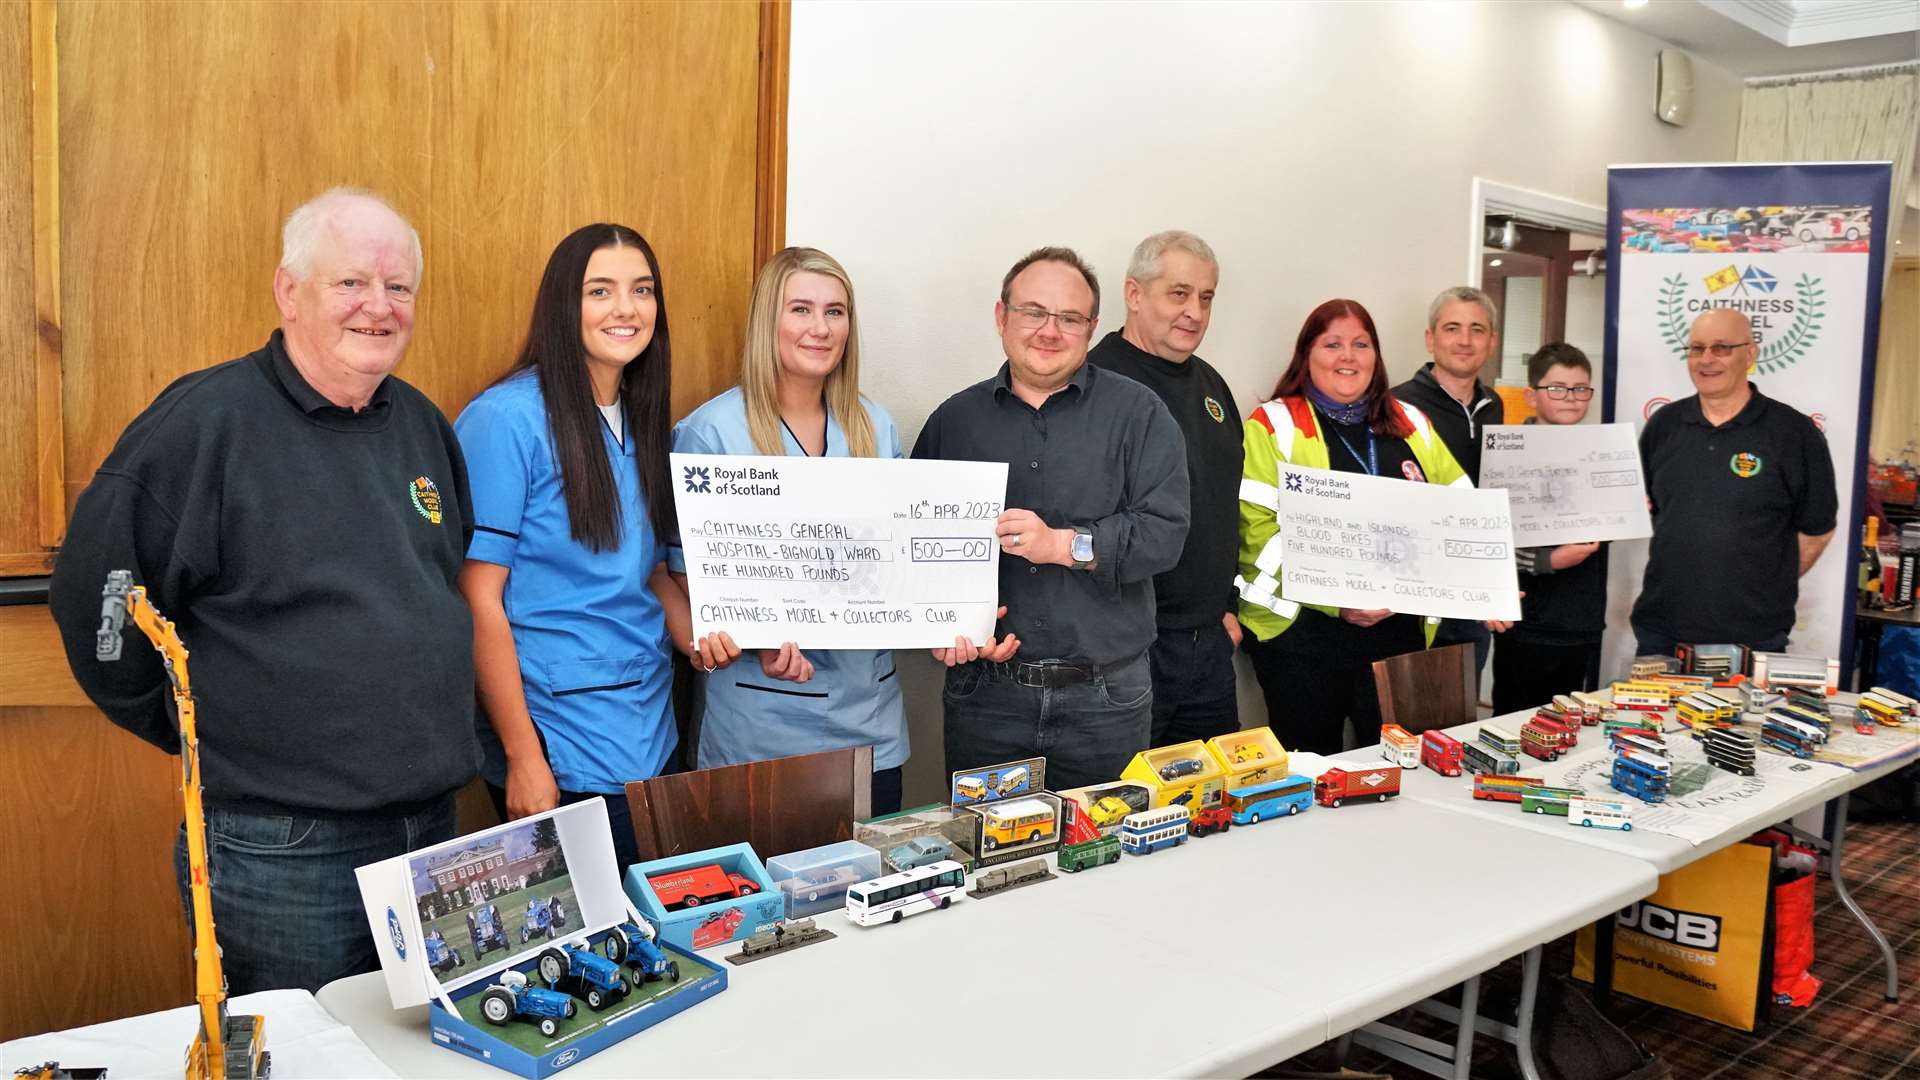 Charity cheques handed out to the good causes at the Caithness Model Club (CMC) show on Sunday. From left, Davie Mackenzie (CMC show manager), Paige Addison (NHS), Molly Todd (NHS), Stephen Makin (NHS), Andrew Anderson (CMC), Pamela Johnson (Blood Bikes), Willie Ross and his son Michael (John O'Groats Playpark) and Kenny Gunn CMC chair. Picture: DGS